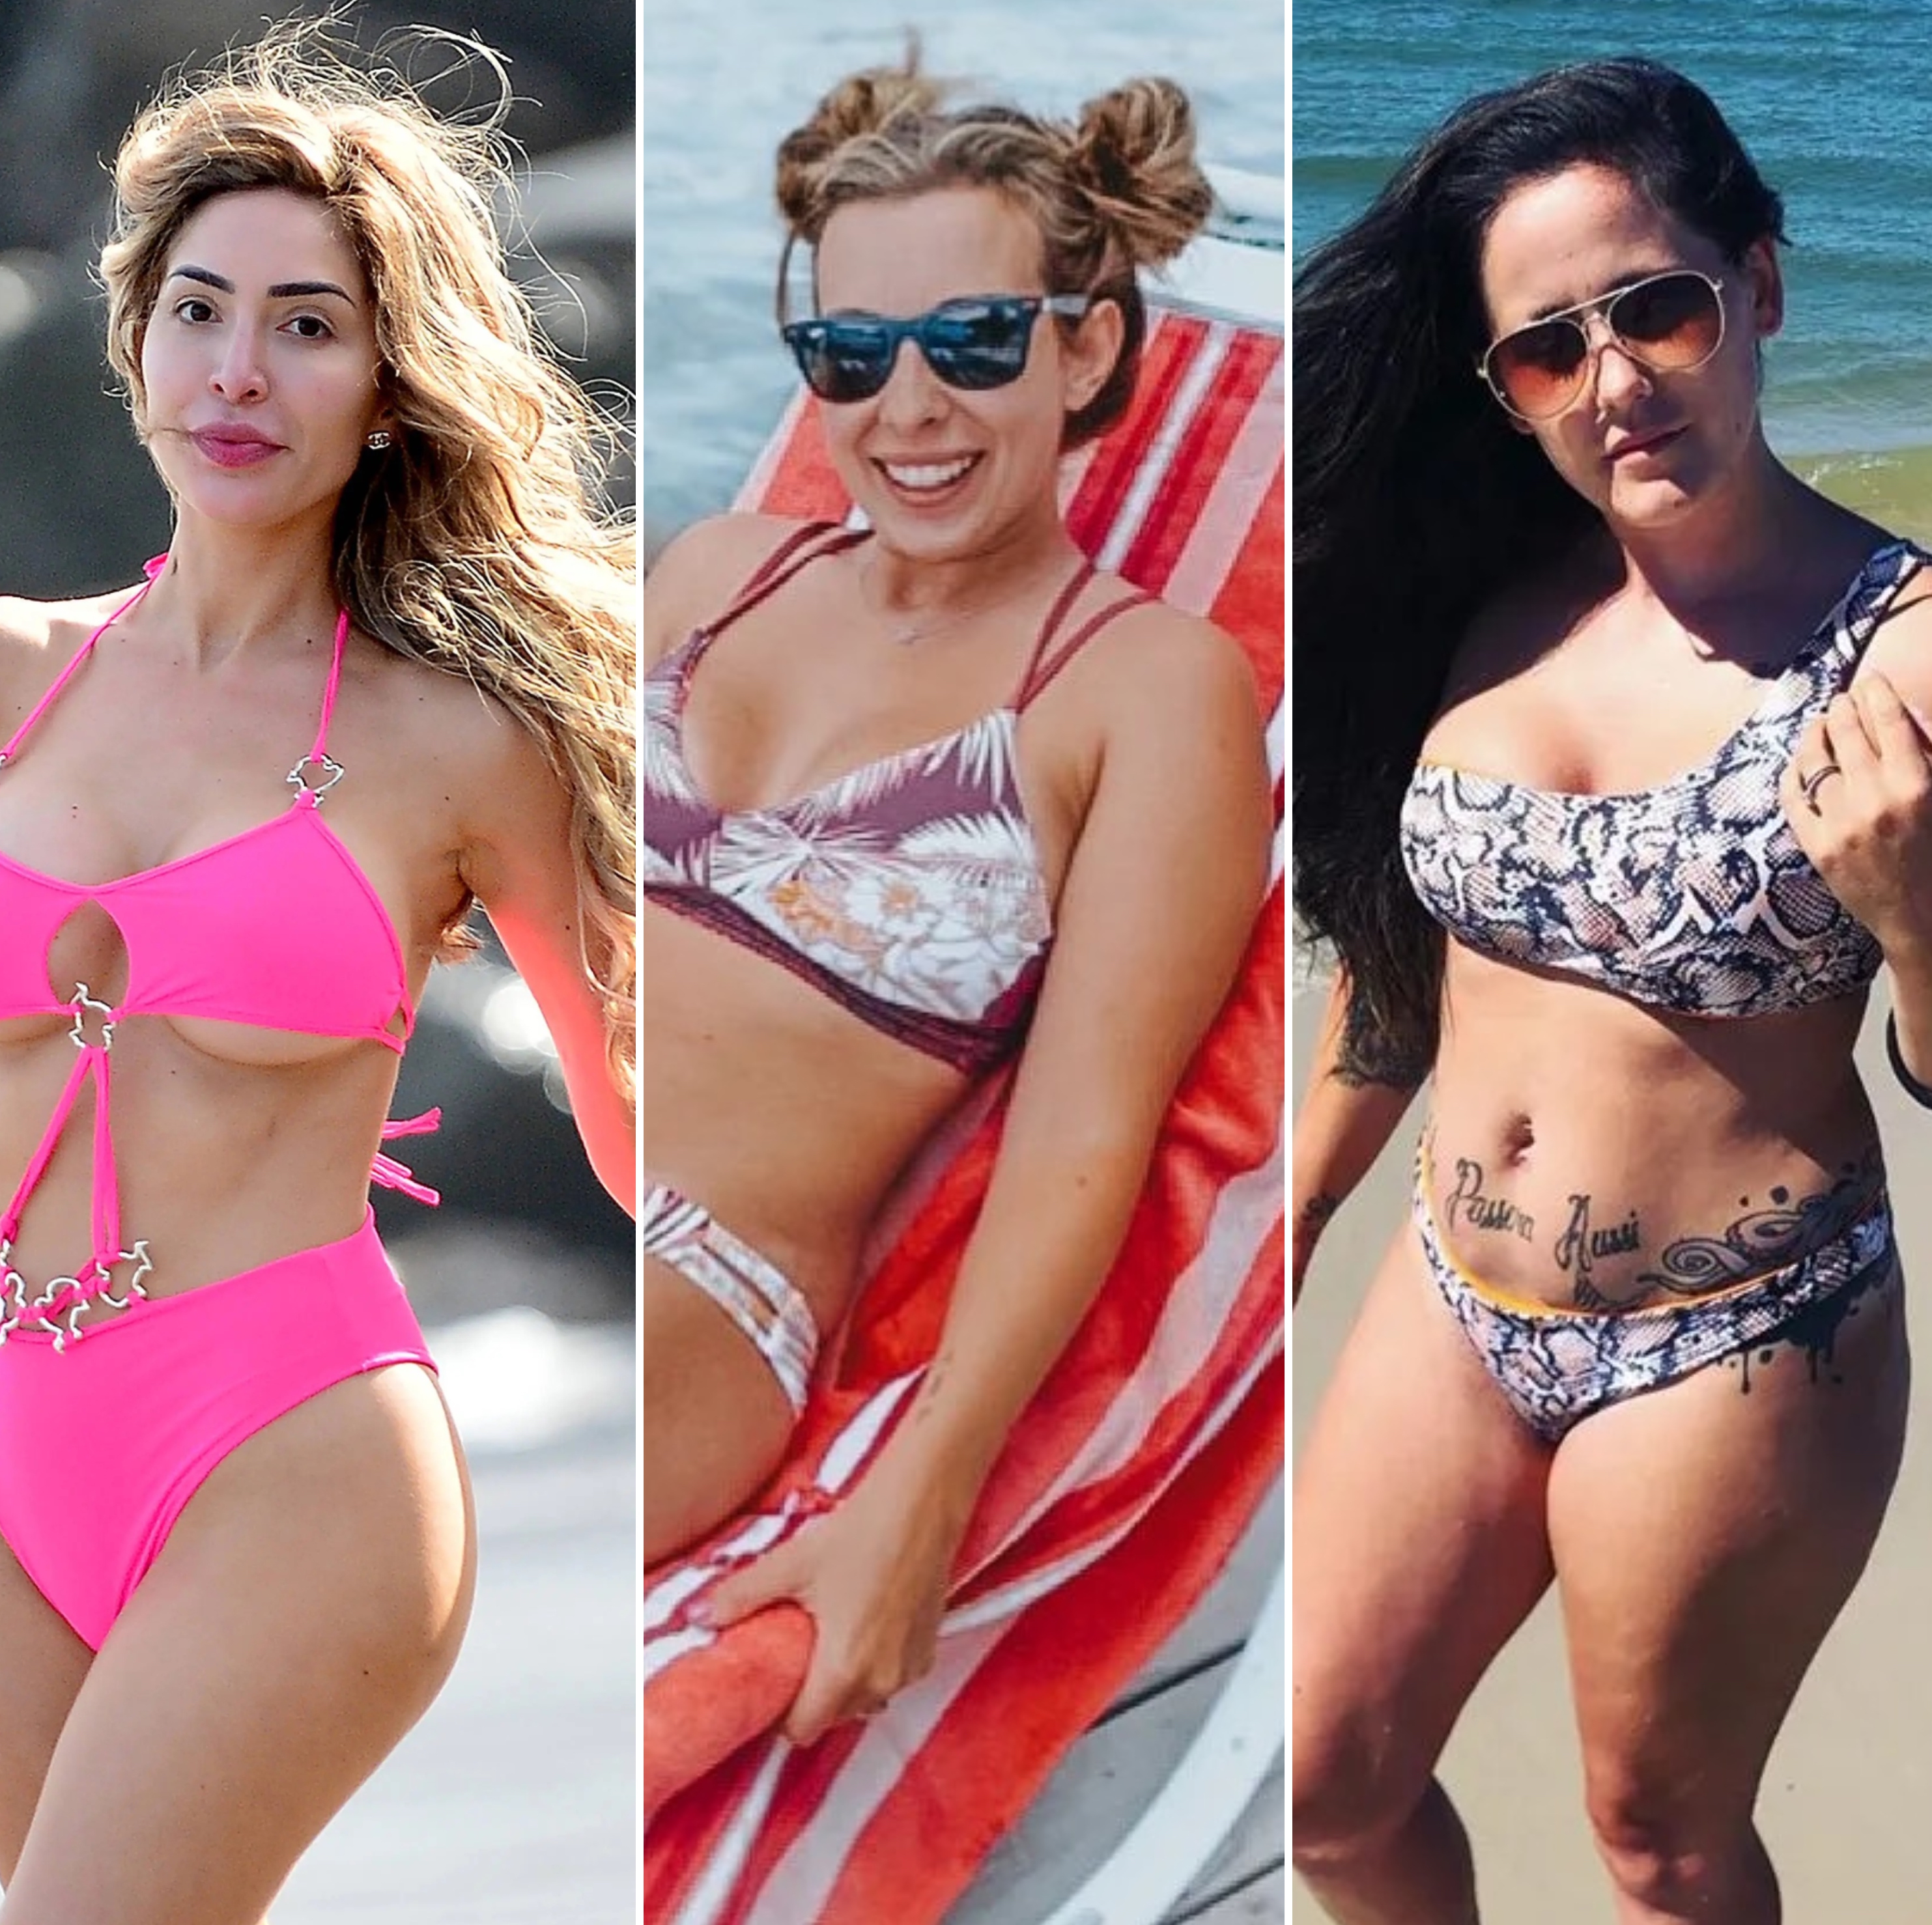 Mother Daught Nude Beach Candid - Teen Mom' Stars Rock Bikinis: Photos of Leah, Kailyn and More